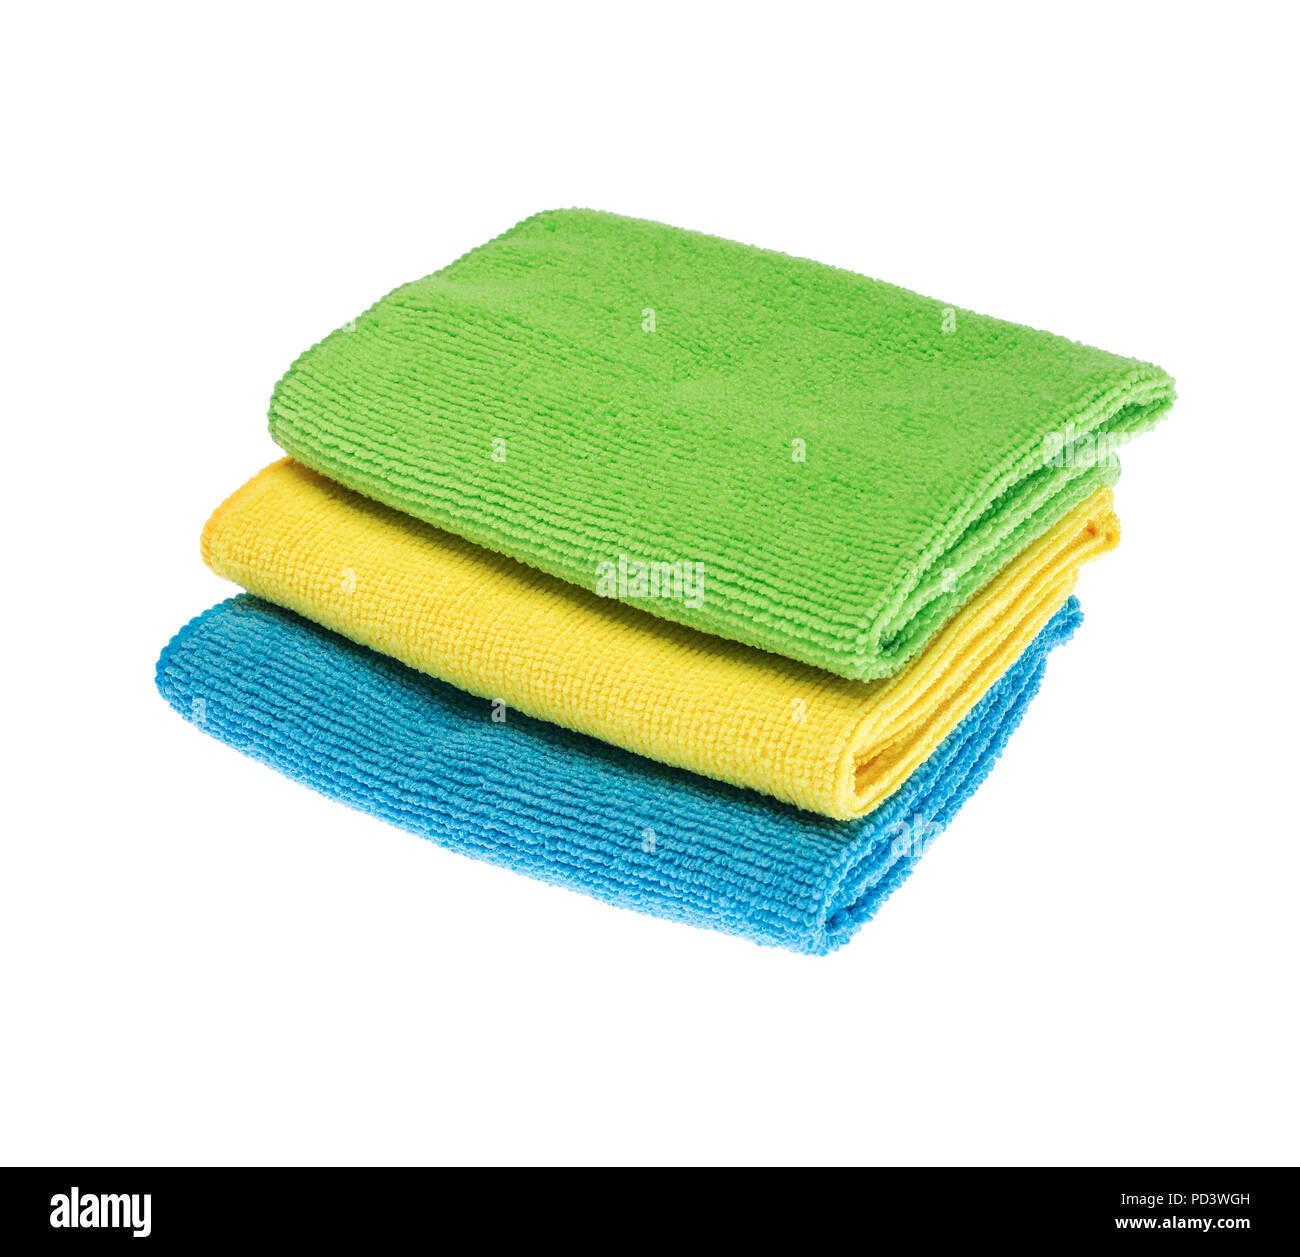 Terry towels for cleaning. Stock Photo